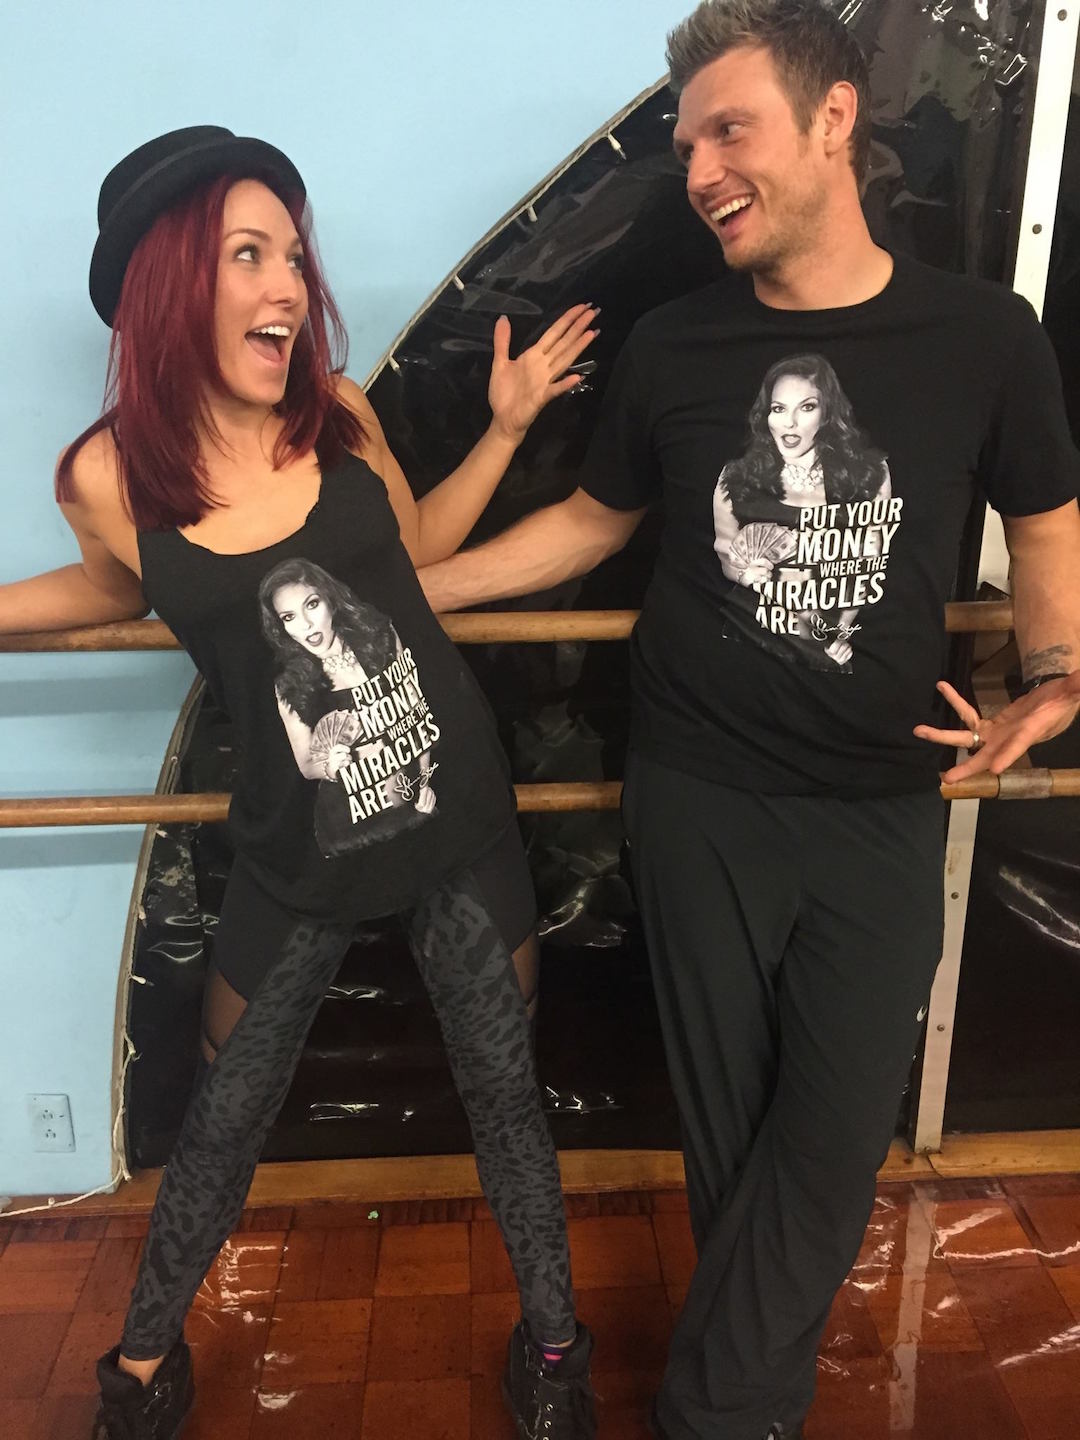 ​Sharna Burgess and Nick Carter from ABC's "Dancing with the Stars" wear her new T-shirt. (Photo submitted by MLC PR)